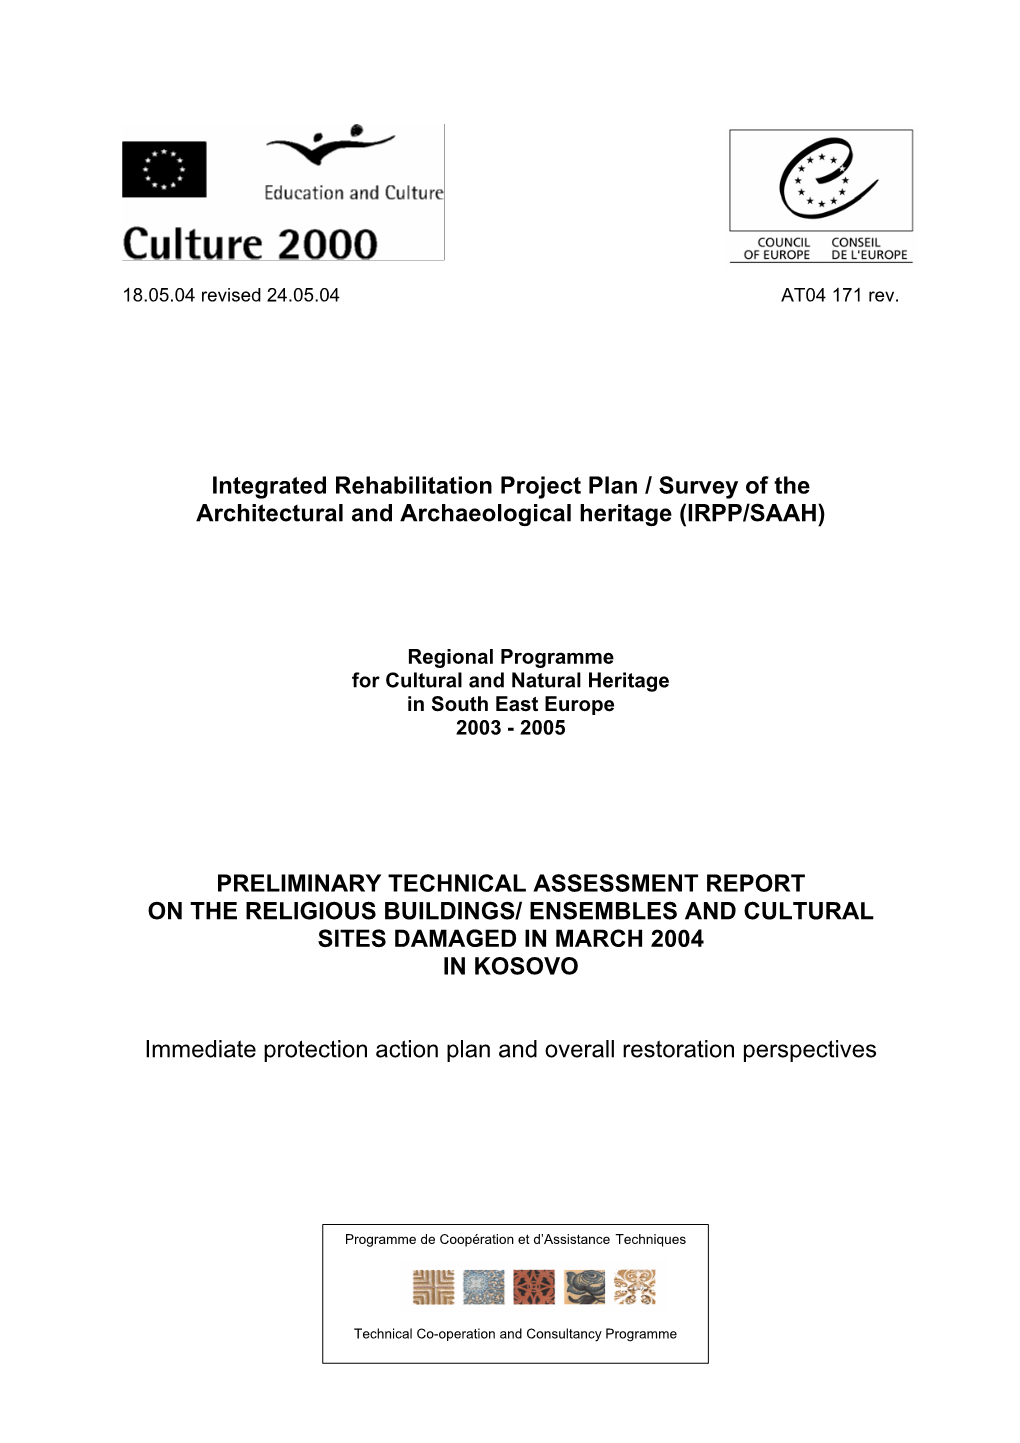 Integrated Rehabilitation Project Plan / Survey of the Architectural and Archaeological Heritage (IRPP/SAAH) PRELIMINARY TECHNIC